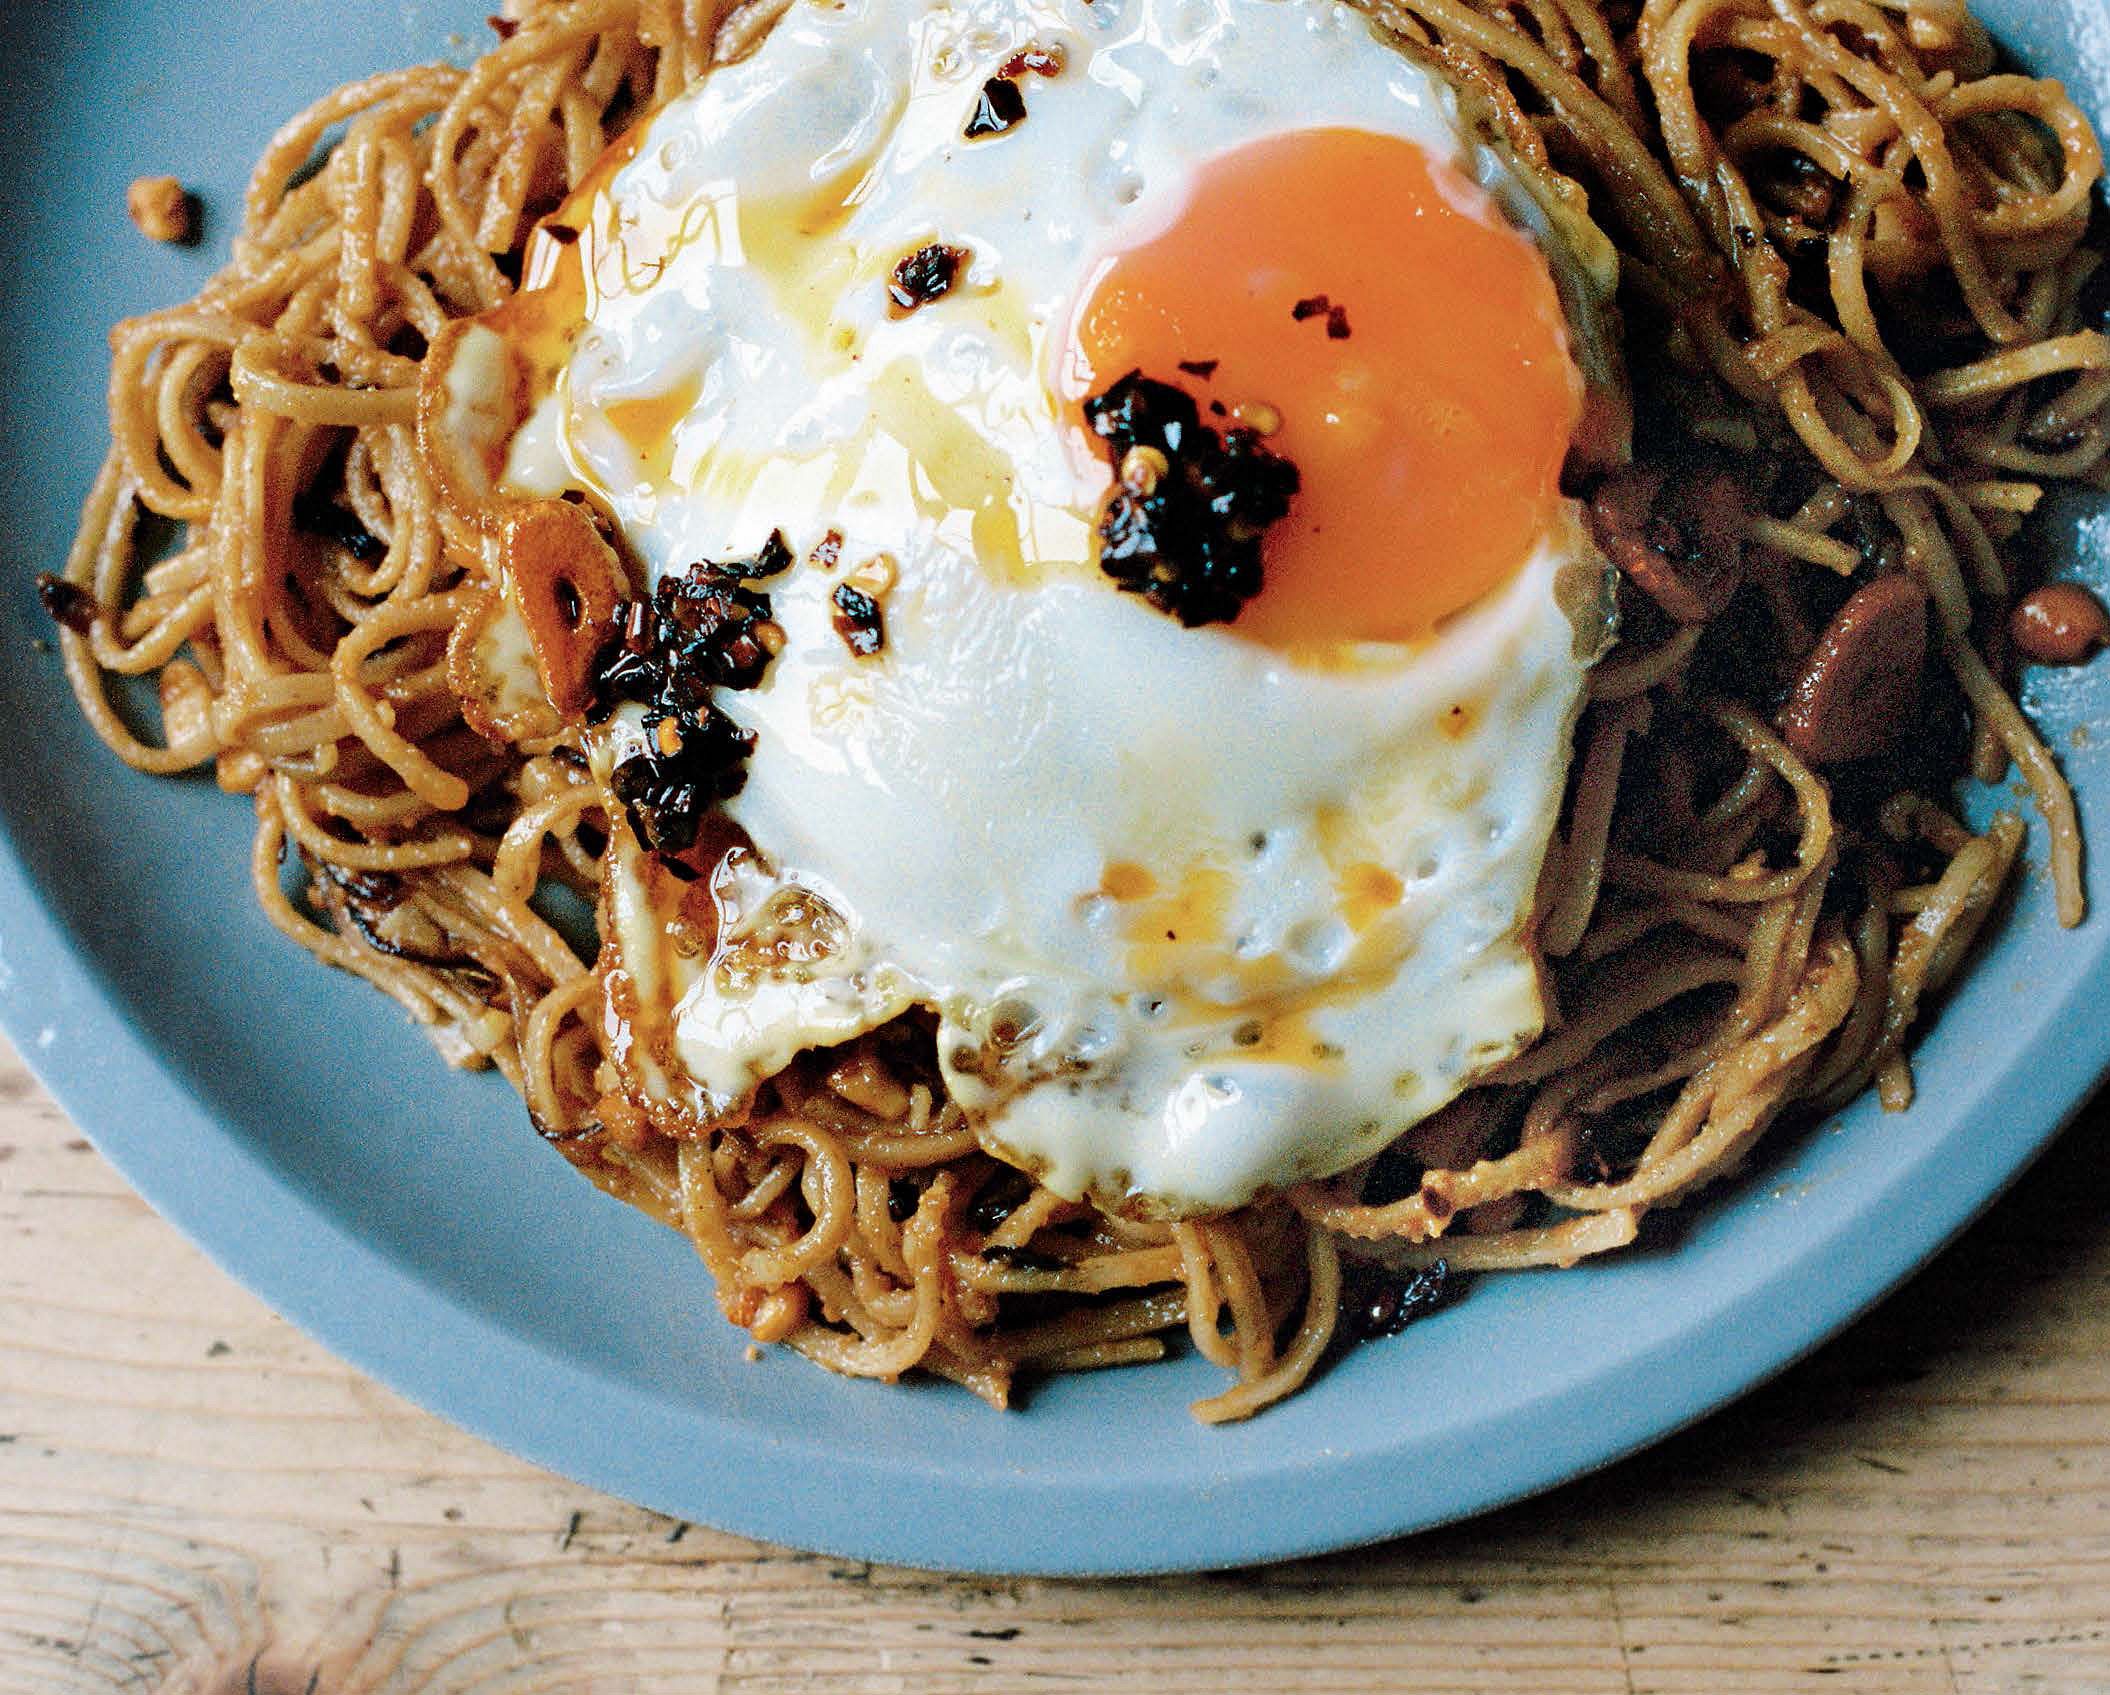 Peanut Butter Noodles with DIY Chilli Oil from The Cornershop Cookbook